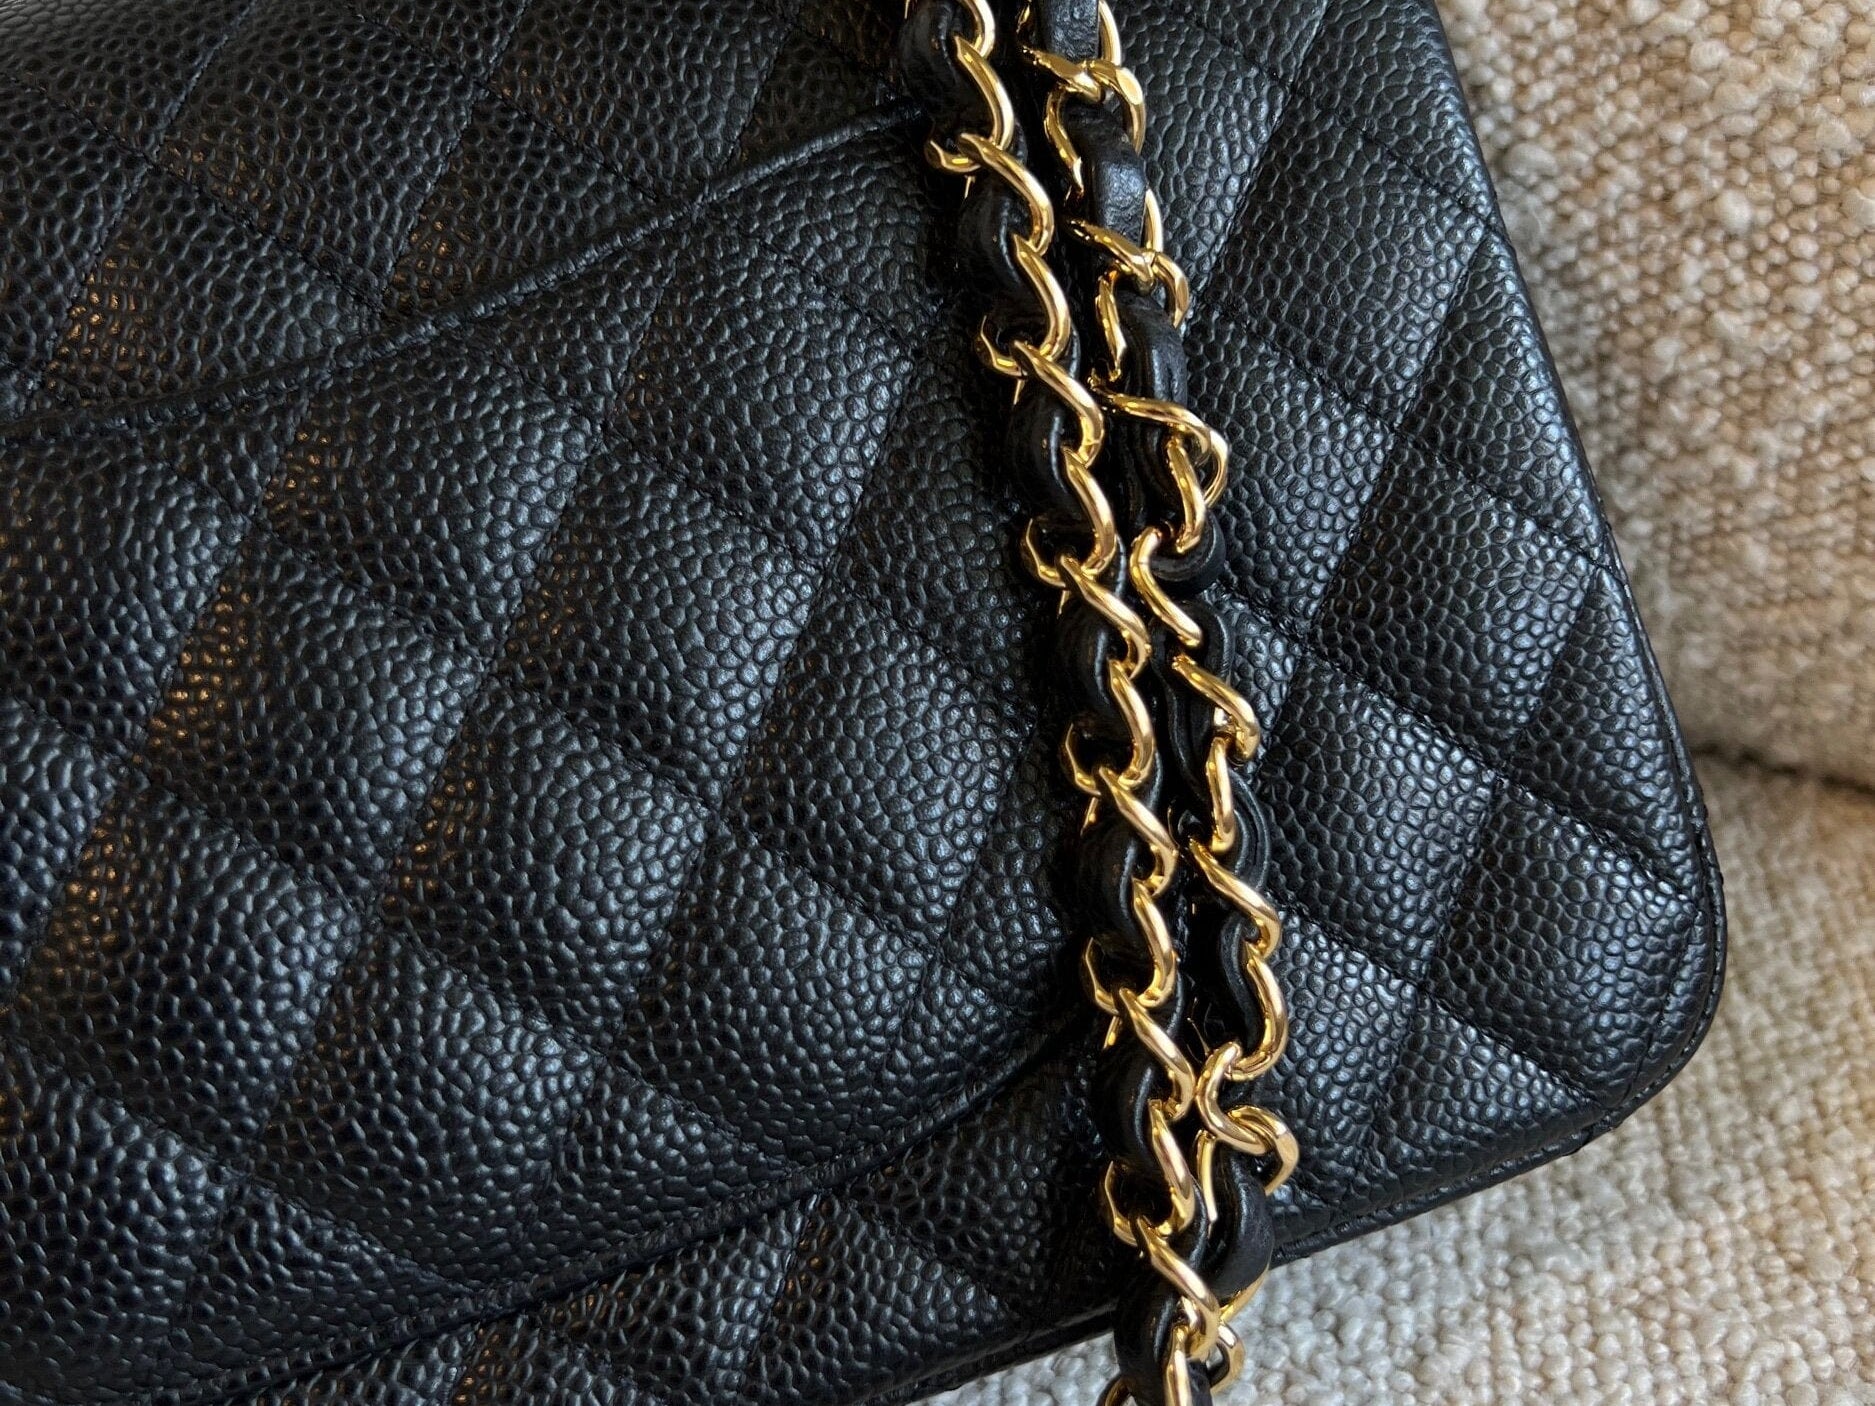 CHANEL Handbag Chanel Black Caviar Quilted Classic Flap Medium GHW - Redeluxe